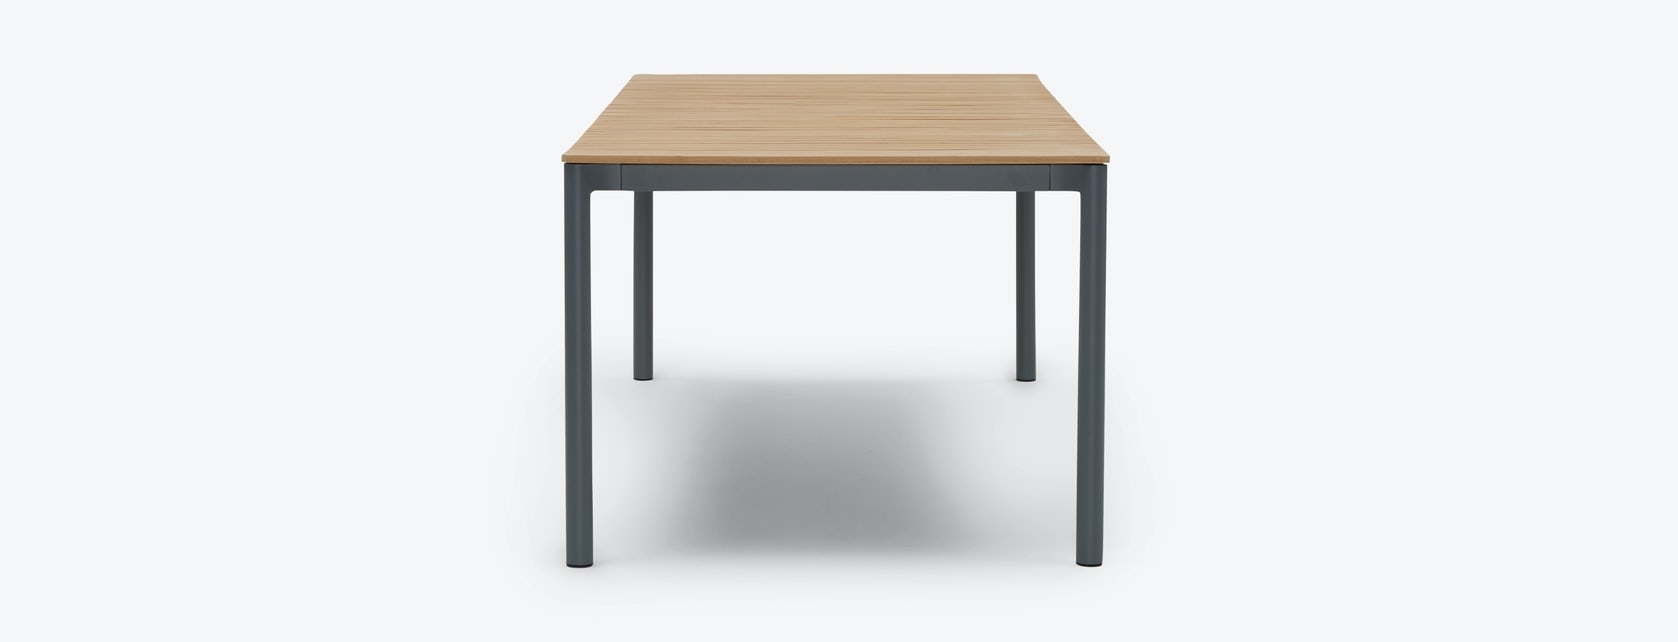 Kinsey Outdoor Dining Table - Image 2